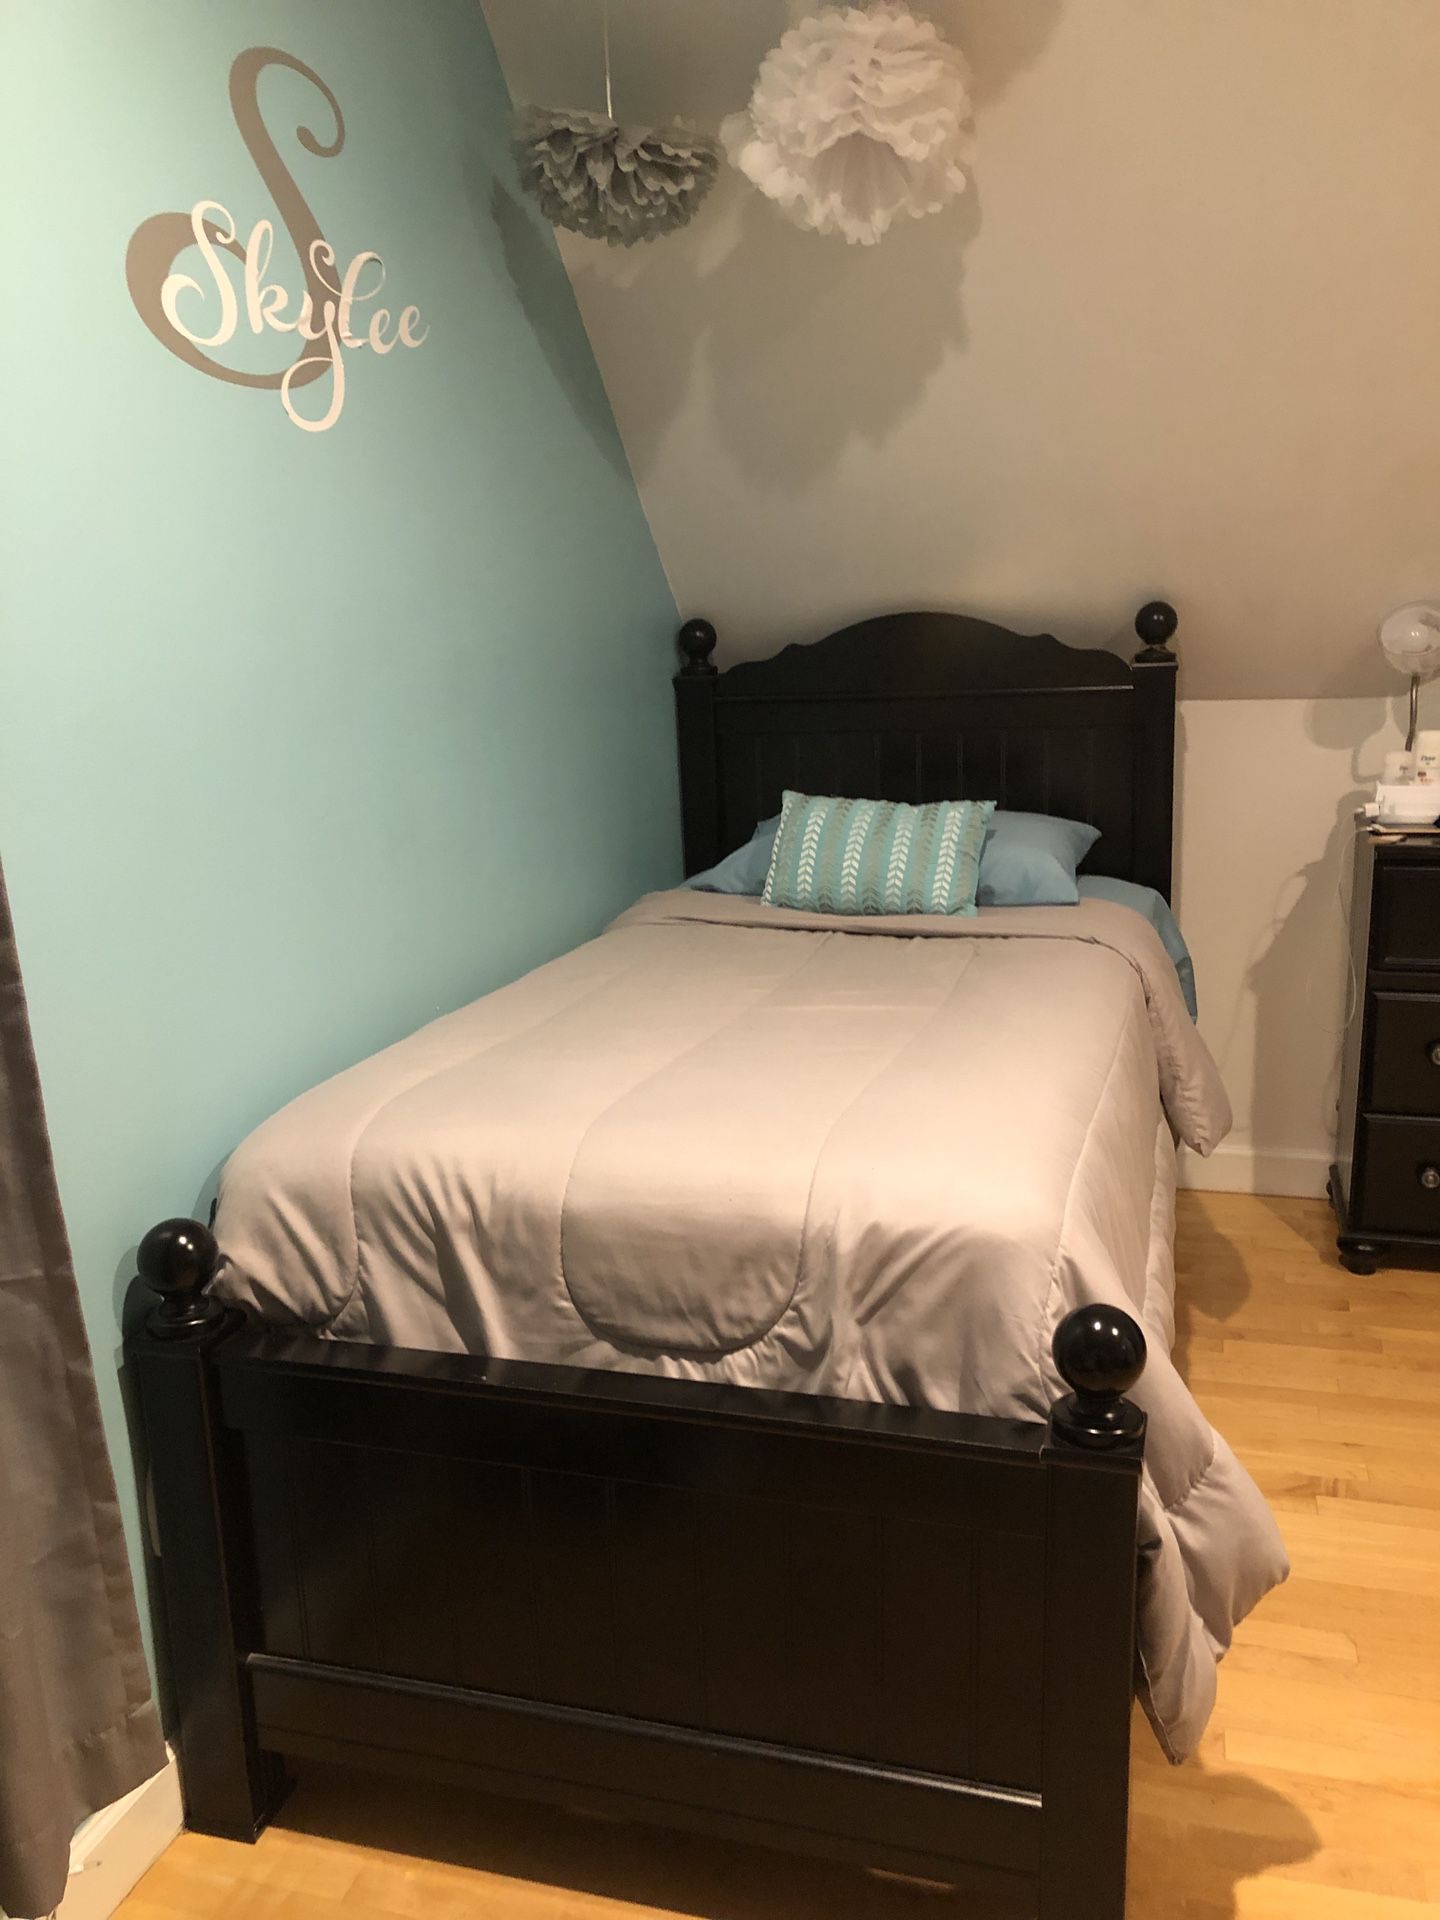 Full bulk bed room set with dresser and nightstand